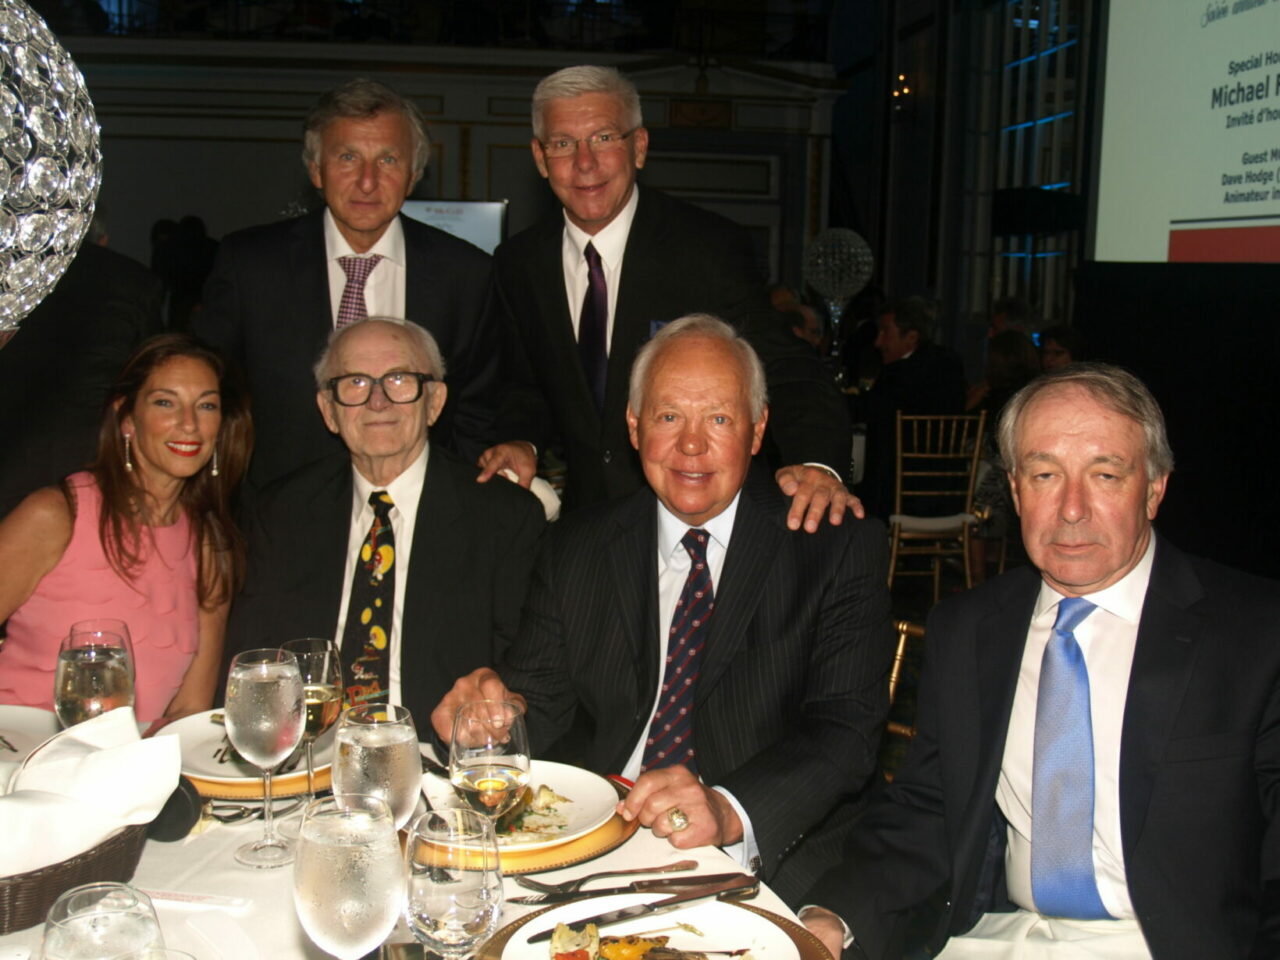 Standing left to right - Peter Varadi, Rejean Houle, Seated left to right - Susan Varadi, Red Fisher, Yvon Cournoyer, Fred Steer (CFO Montreal Canadians) (Photo: Jack Gurevitch)